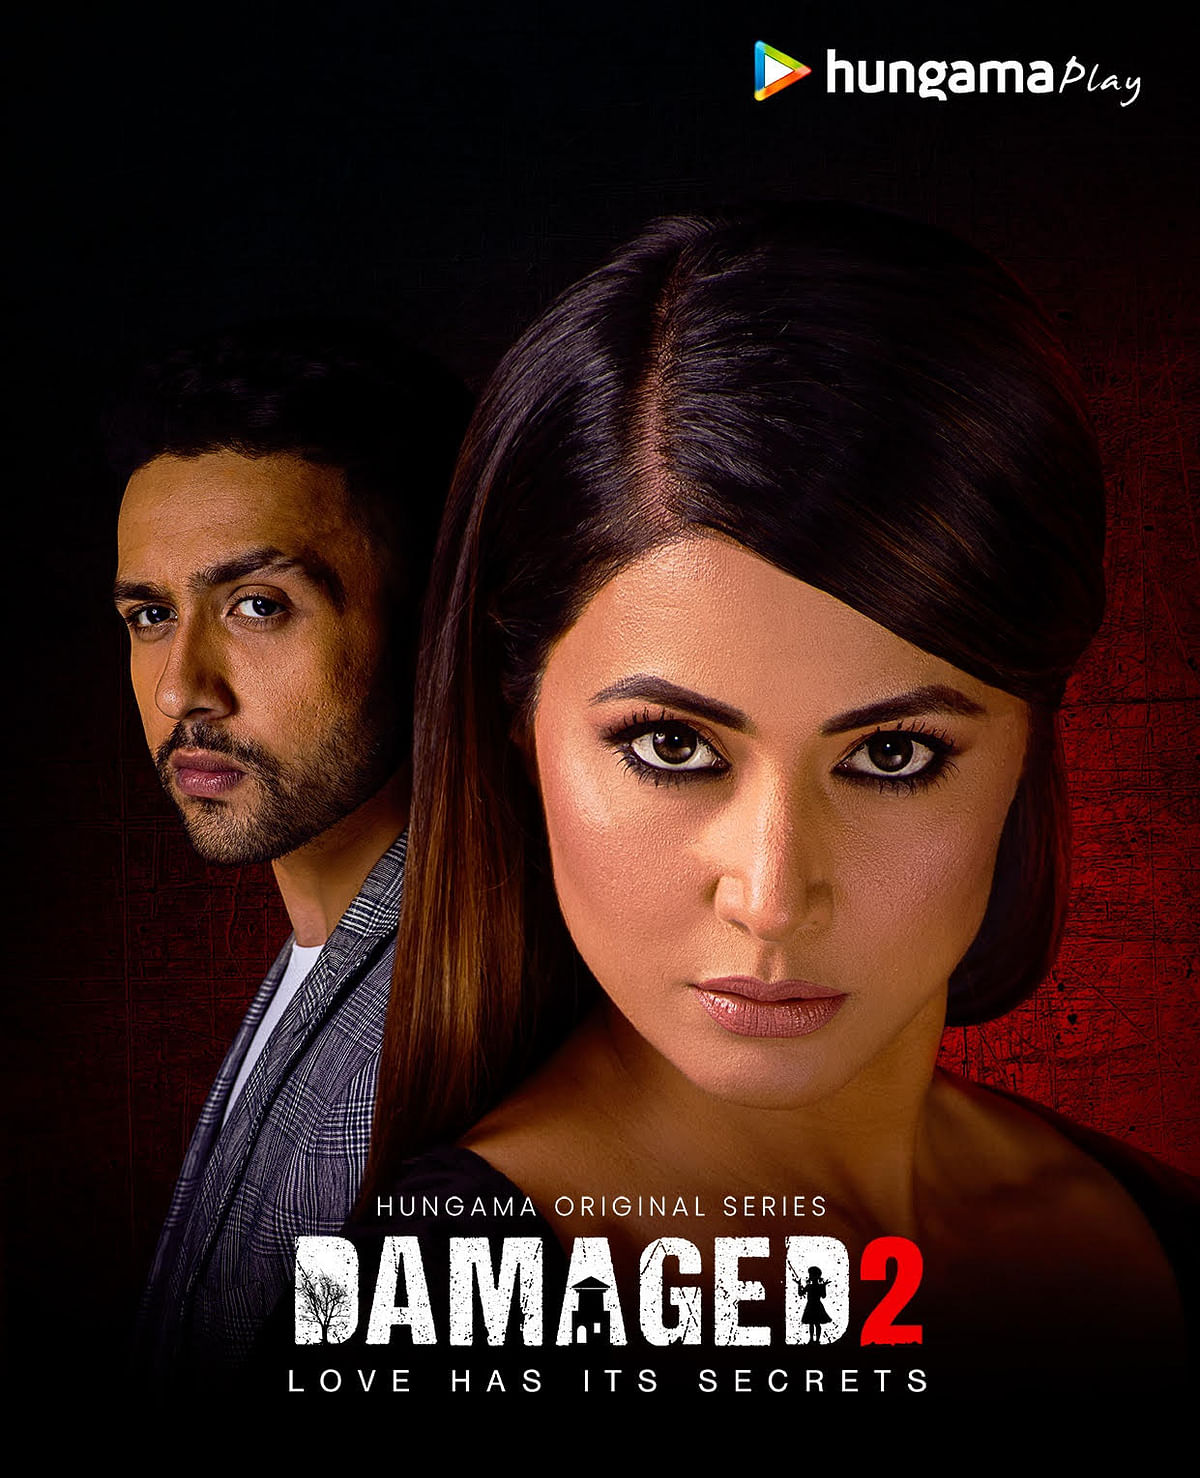 Hina Khan ('Damaged 2', Hungama Play) | 'Yeh Rishta Kya Kehlata Hai' actress Hina Khan did full justice to her layered and complicated character in 'Damaged 2' and left fans asking for more. Credit: PR Handout